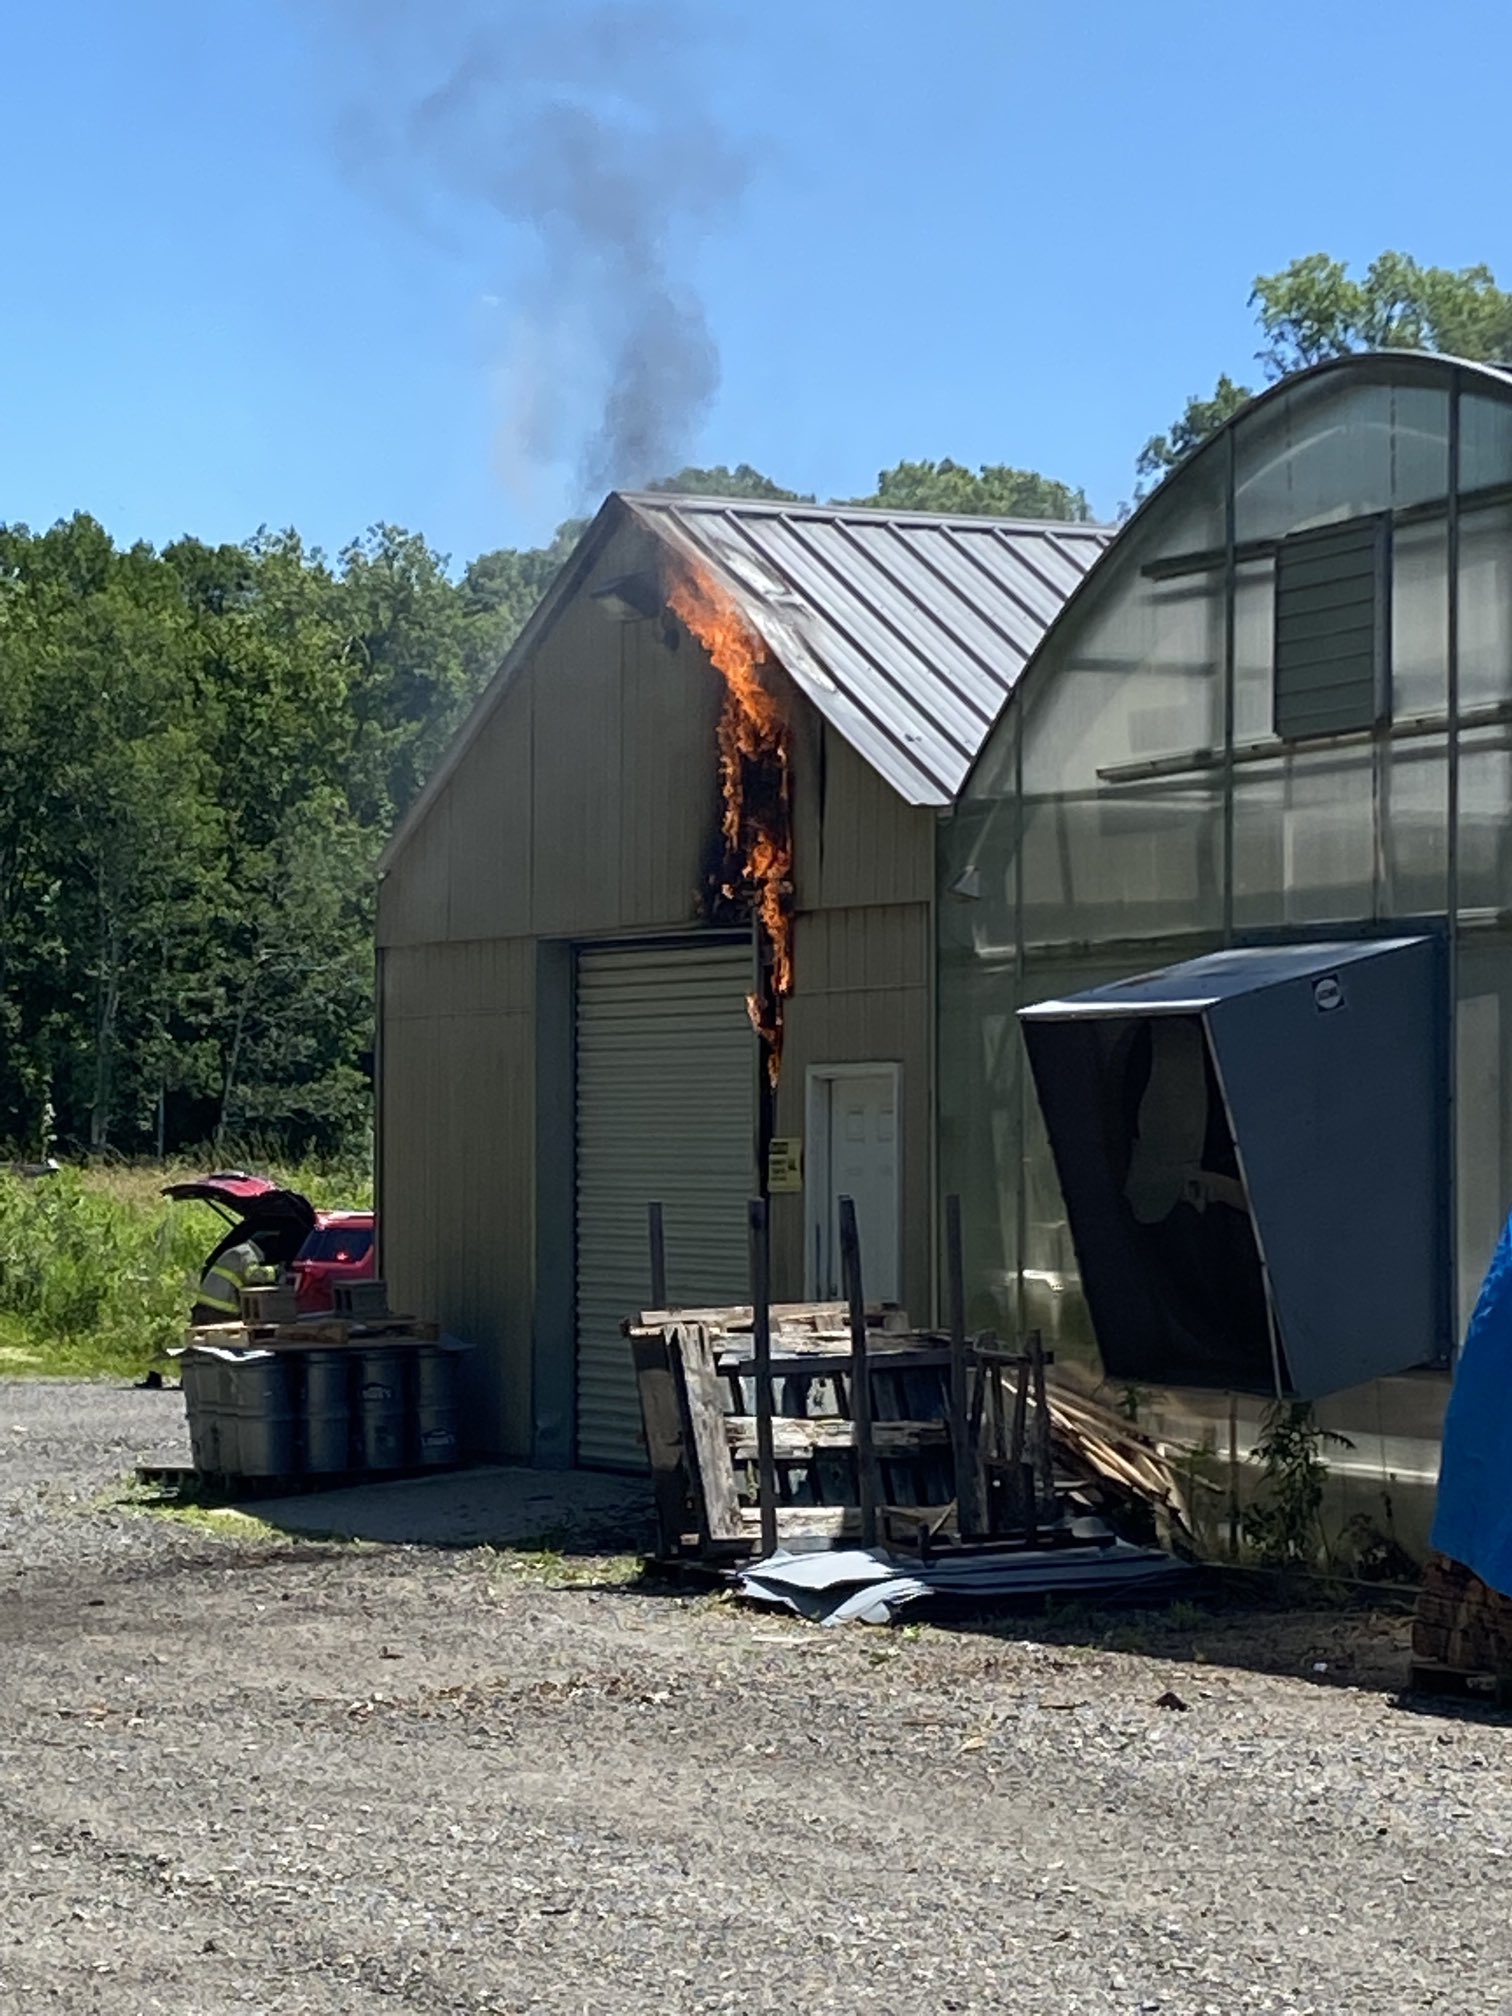 Start Line Brewing will remain open after minor fire in garage